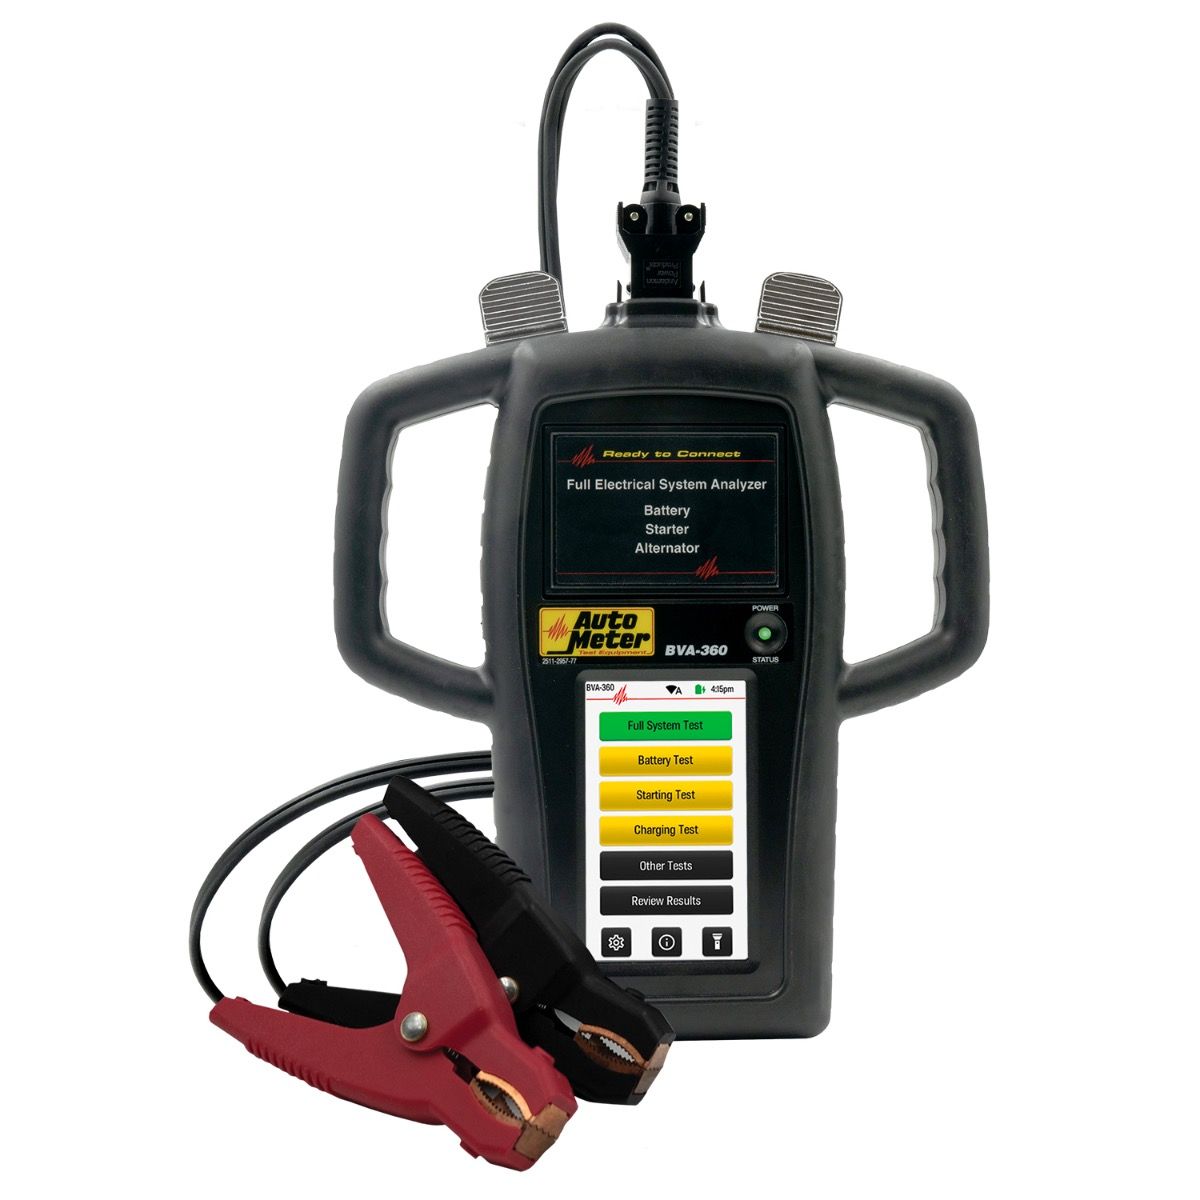 BVA-360; HAND-HELD BATTERY & ELECTRICAL SYSTEM TESTER